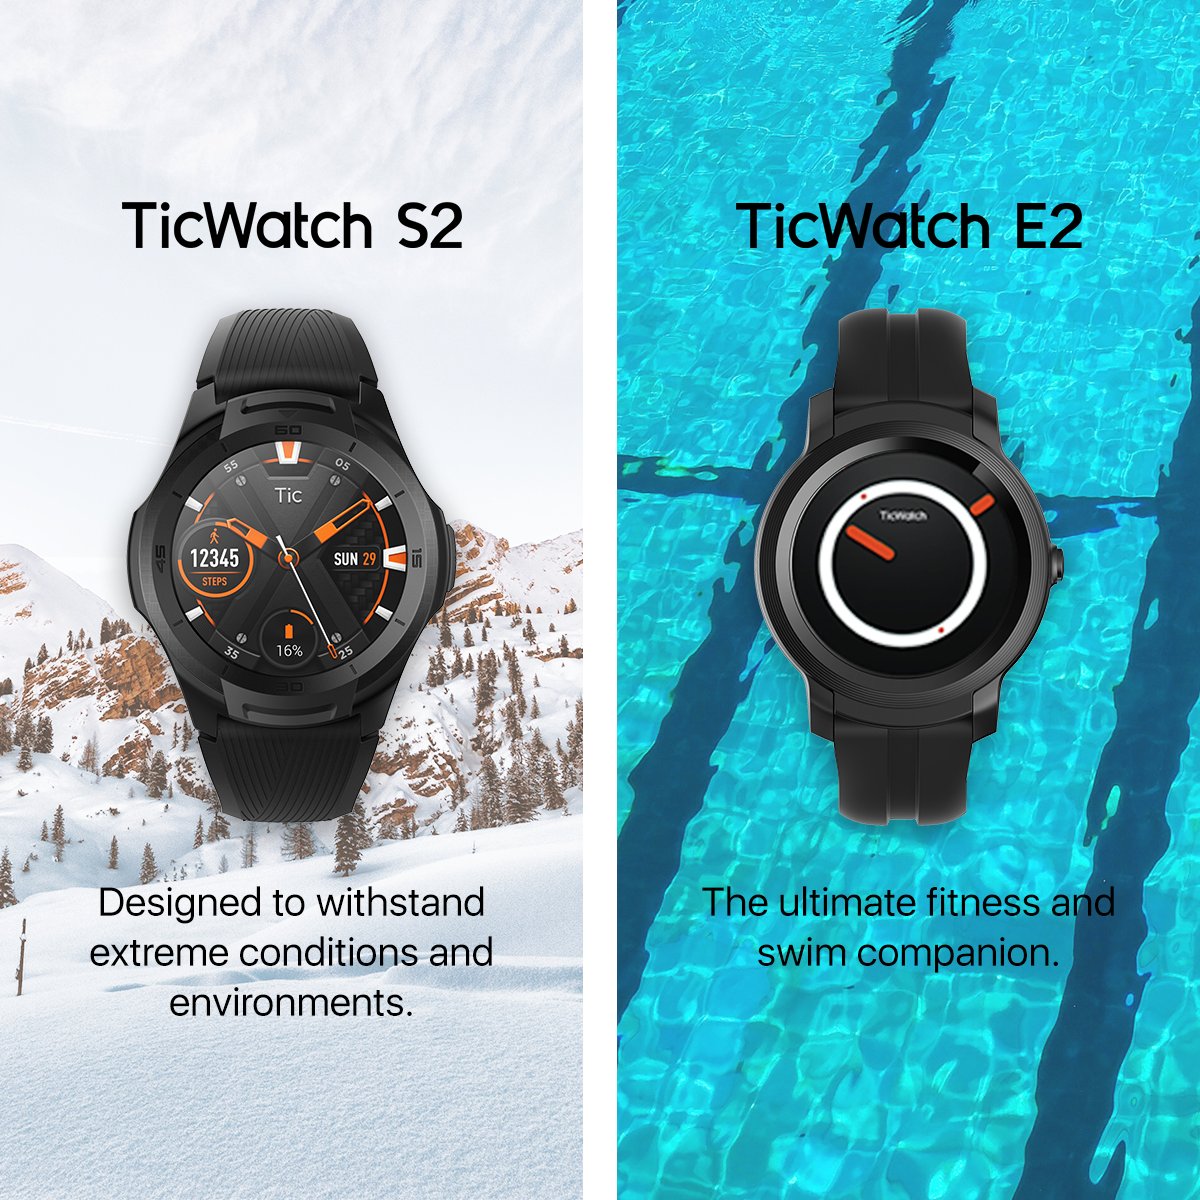 Ticwatch E2 and Ticwatch S2